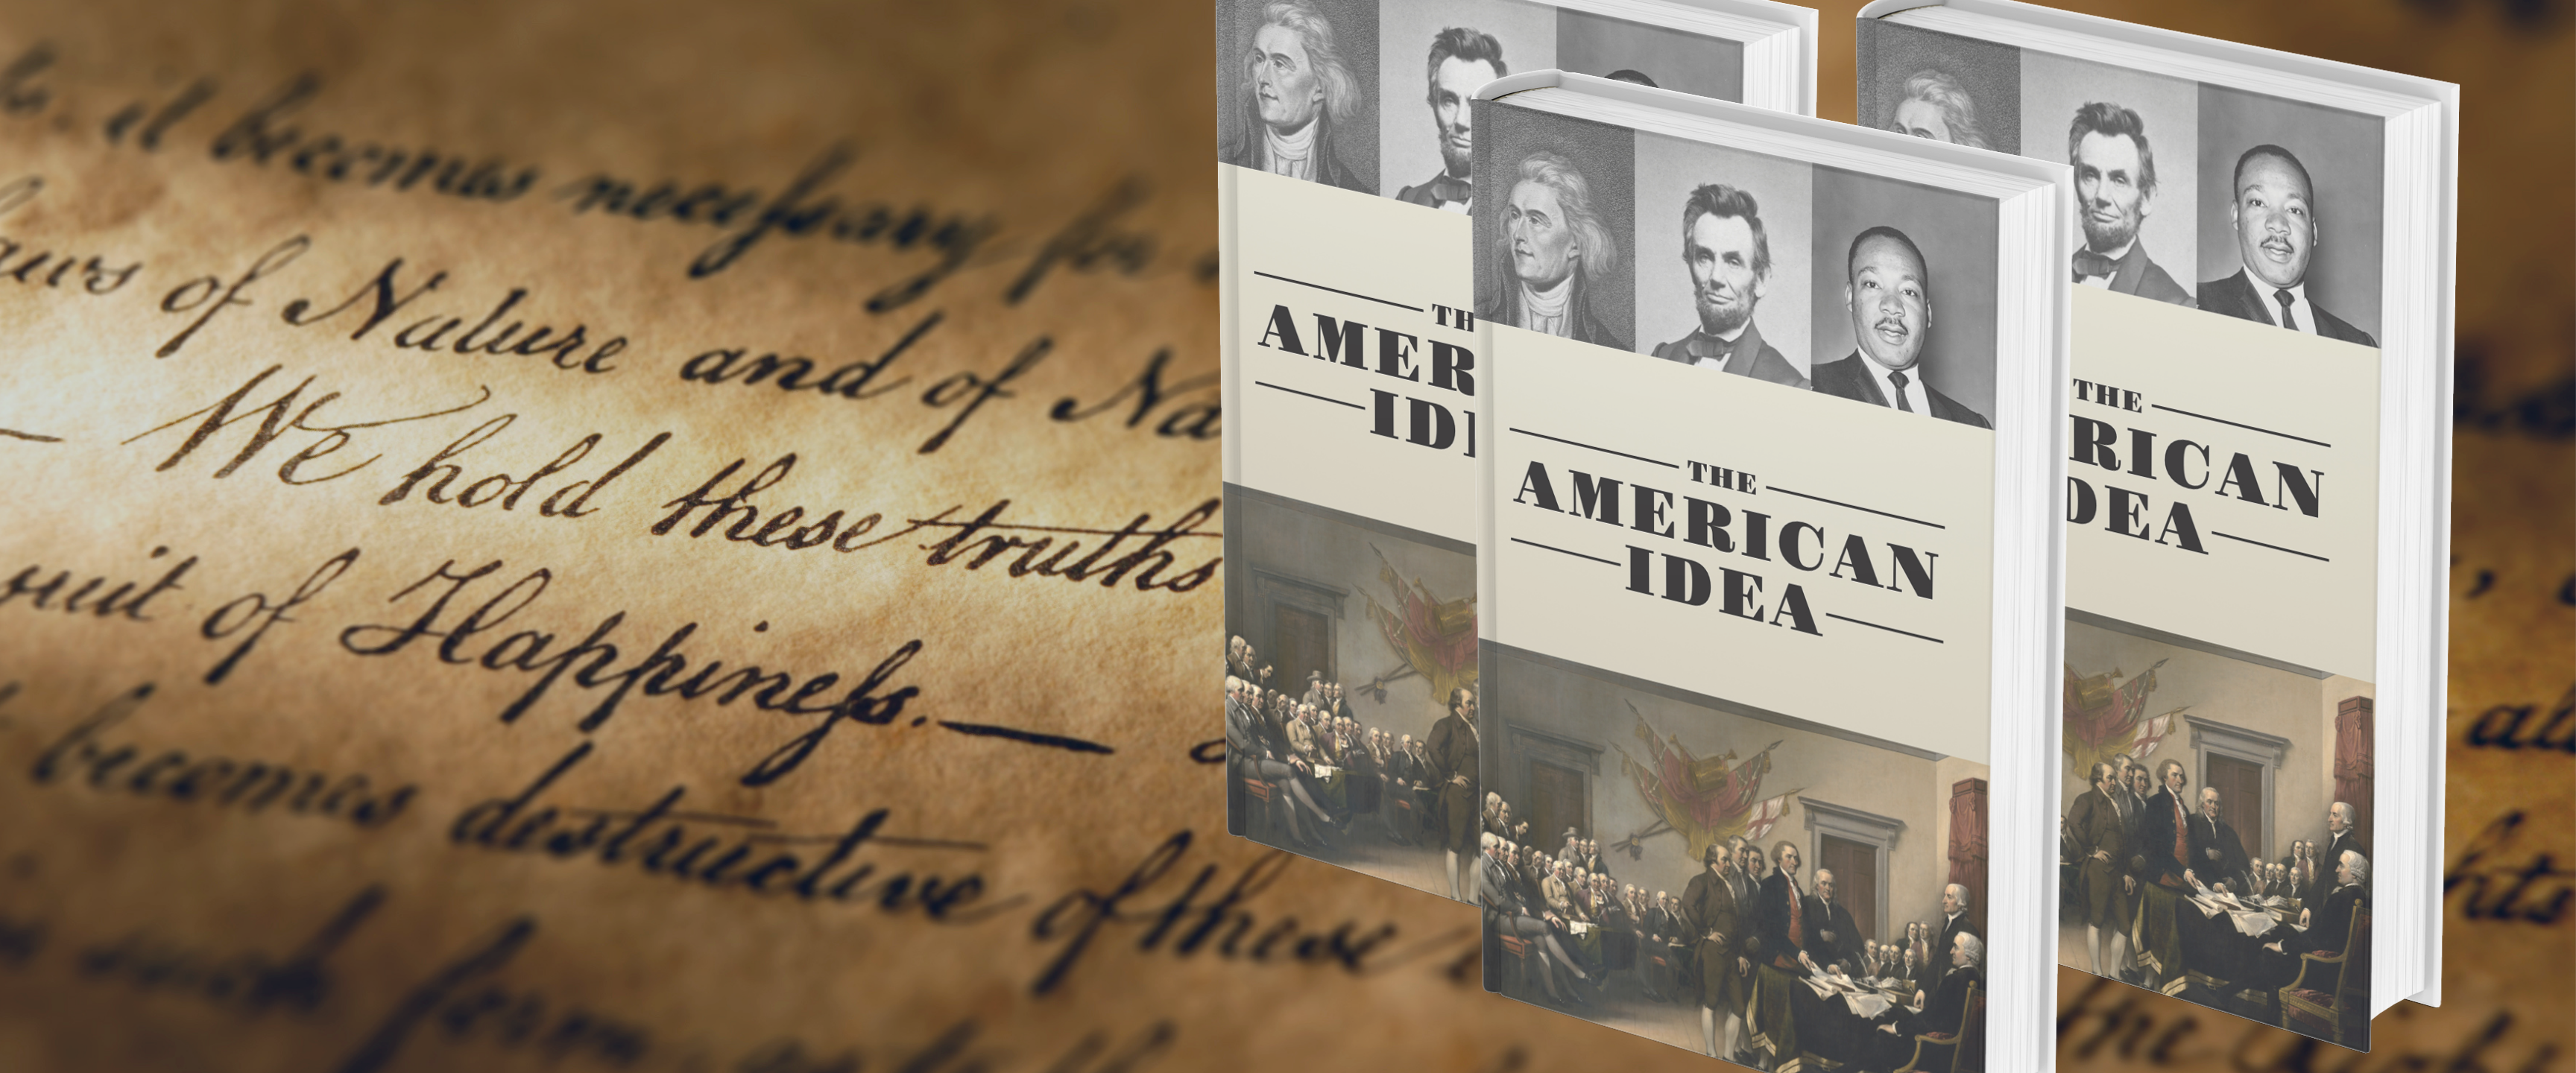 Get your copy of The American Idea!